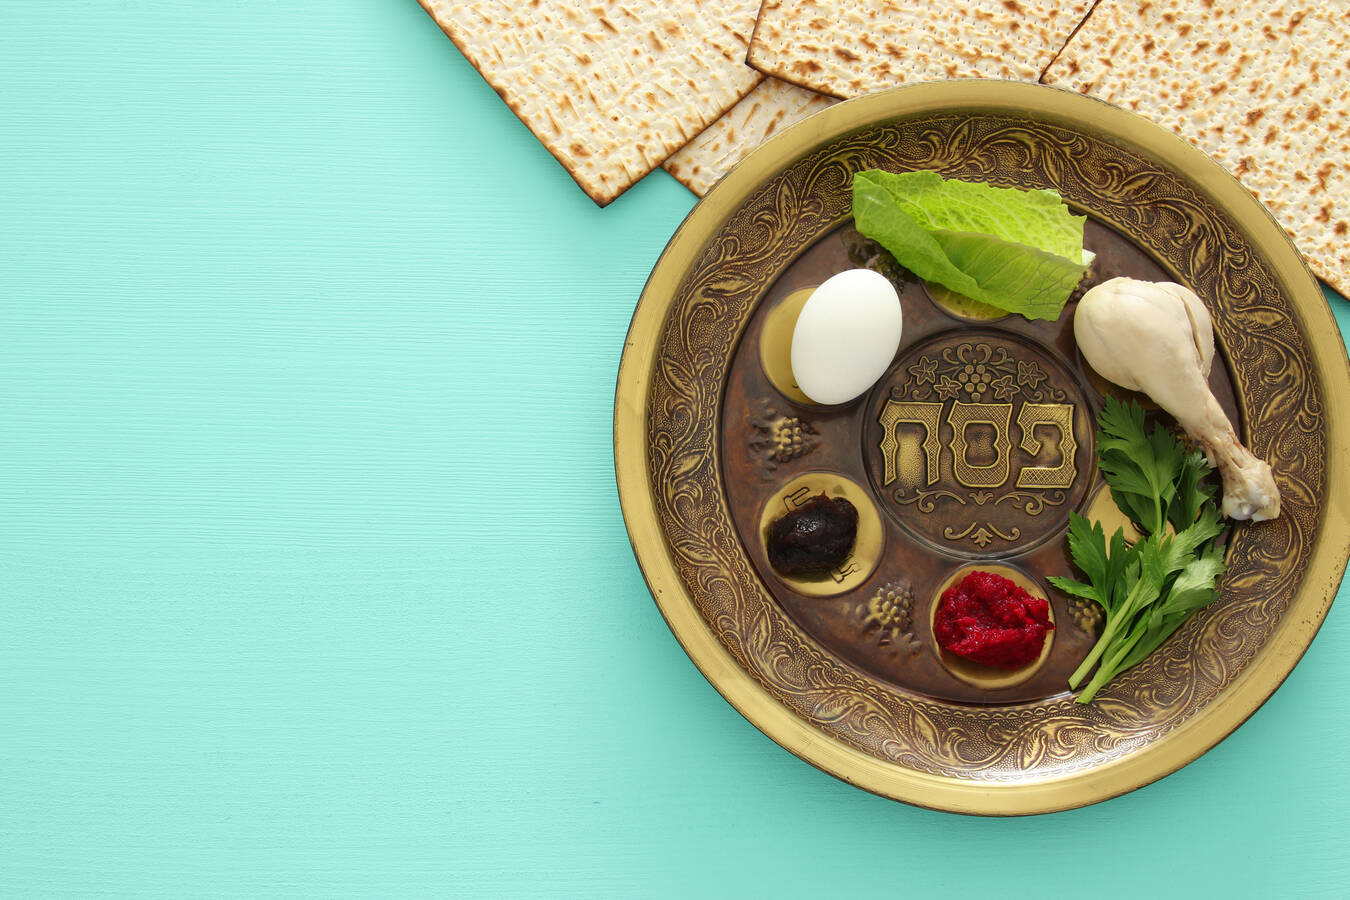 the real meaning of passover